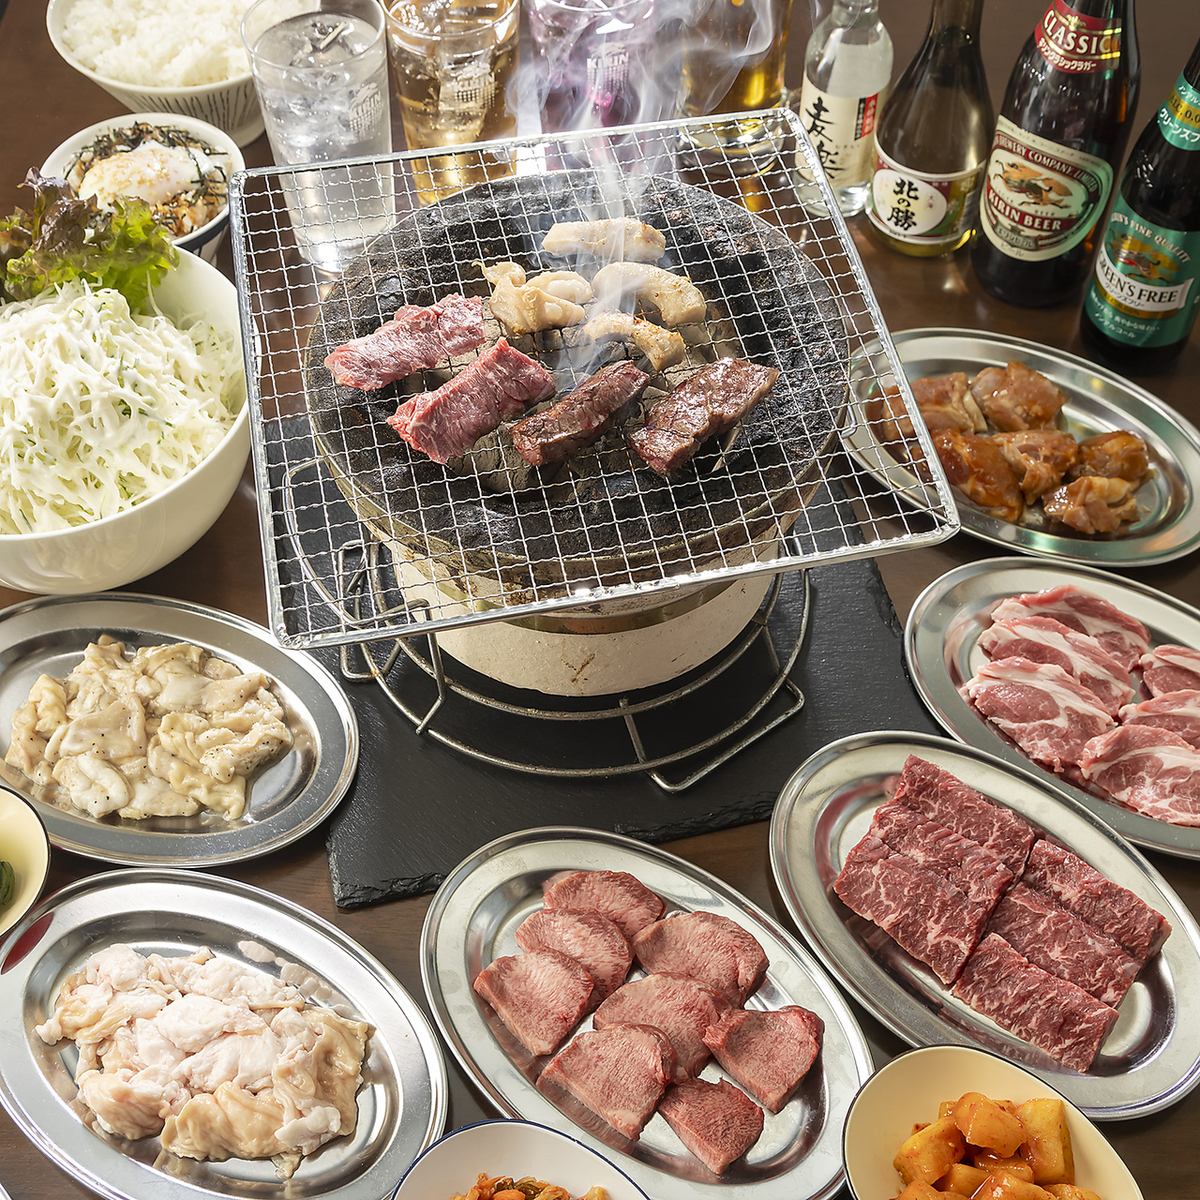 At our restaurant, you can enjoy a variety of meats such as beef, pork, chicken, and lamb over charcoal.